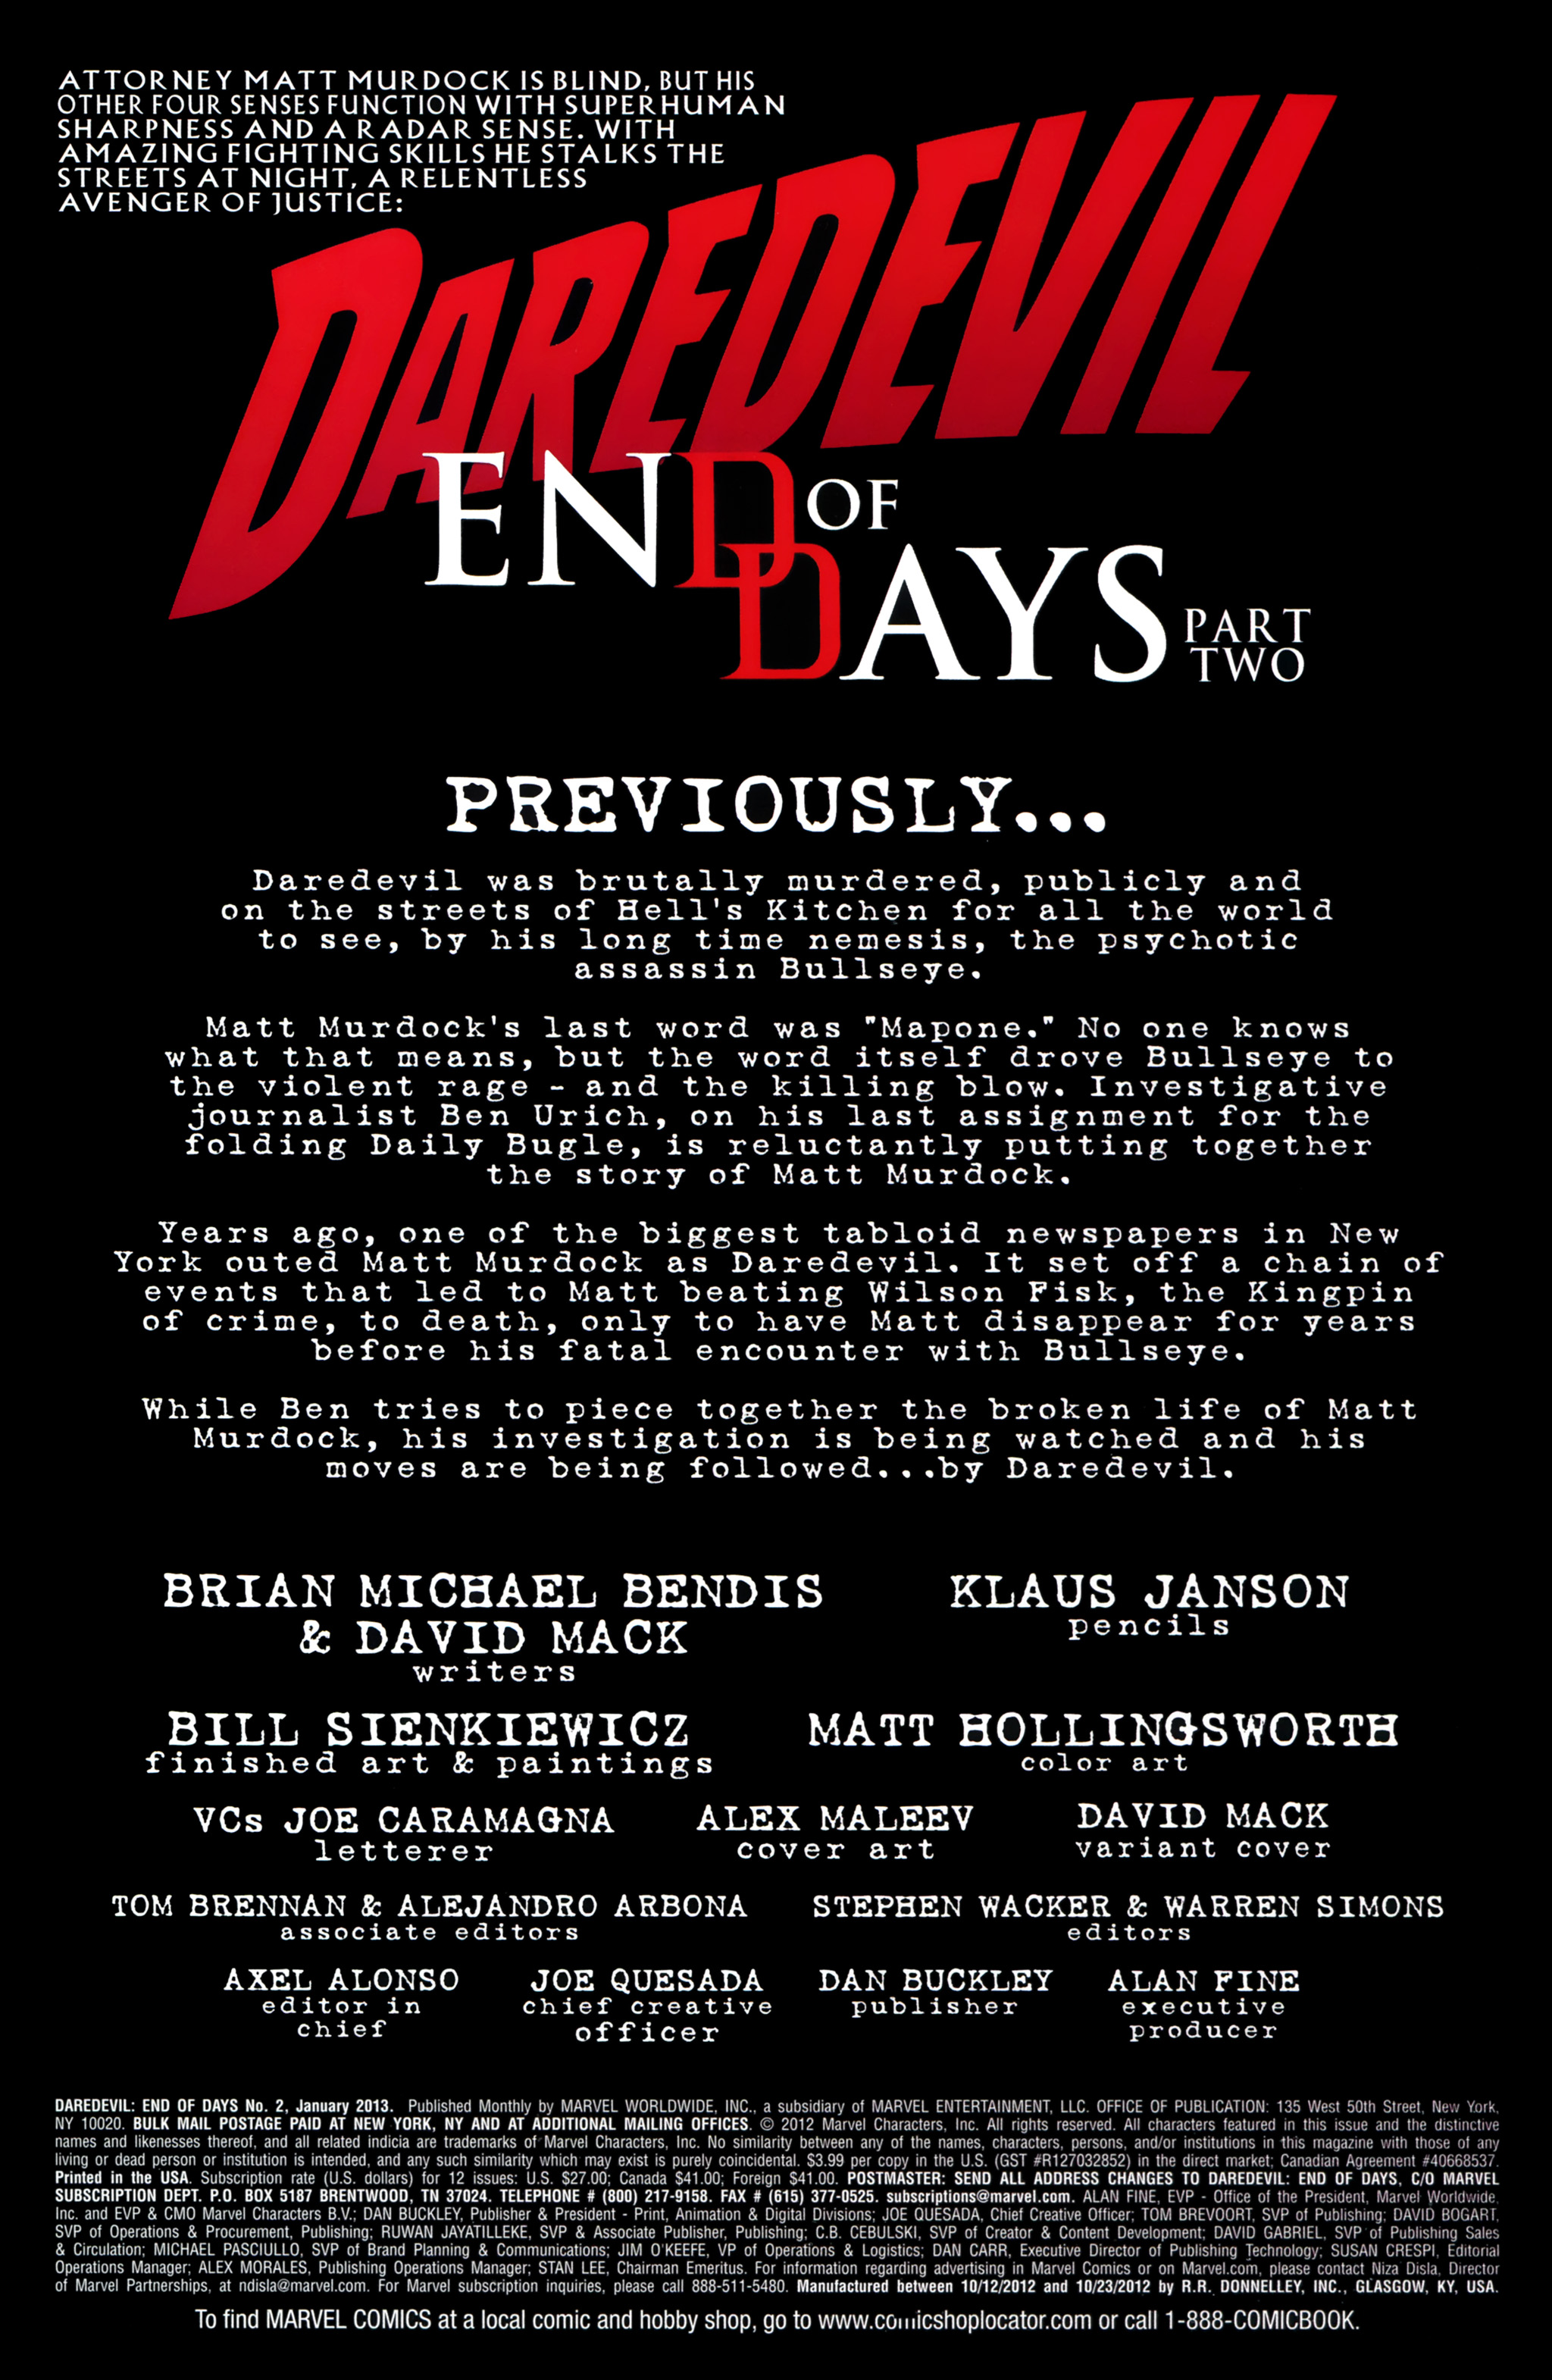 Read online Daredevil: End of Days comic -  Issue #2 - 3